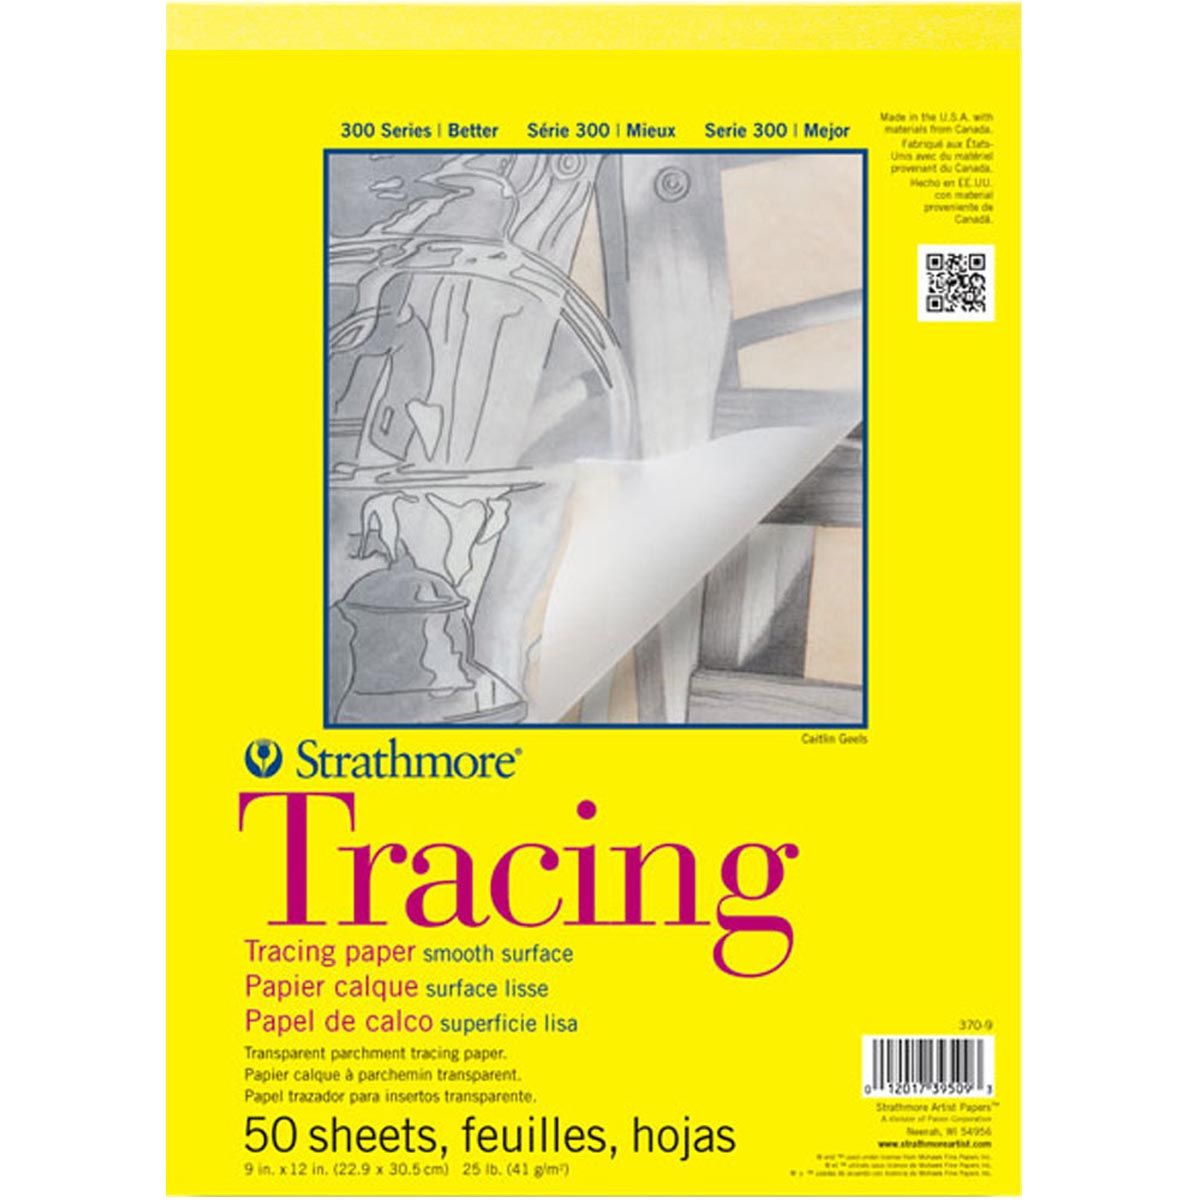 Strathmore 300 Series Tracing Paper Pad 50 Sheets 14"x 17"